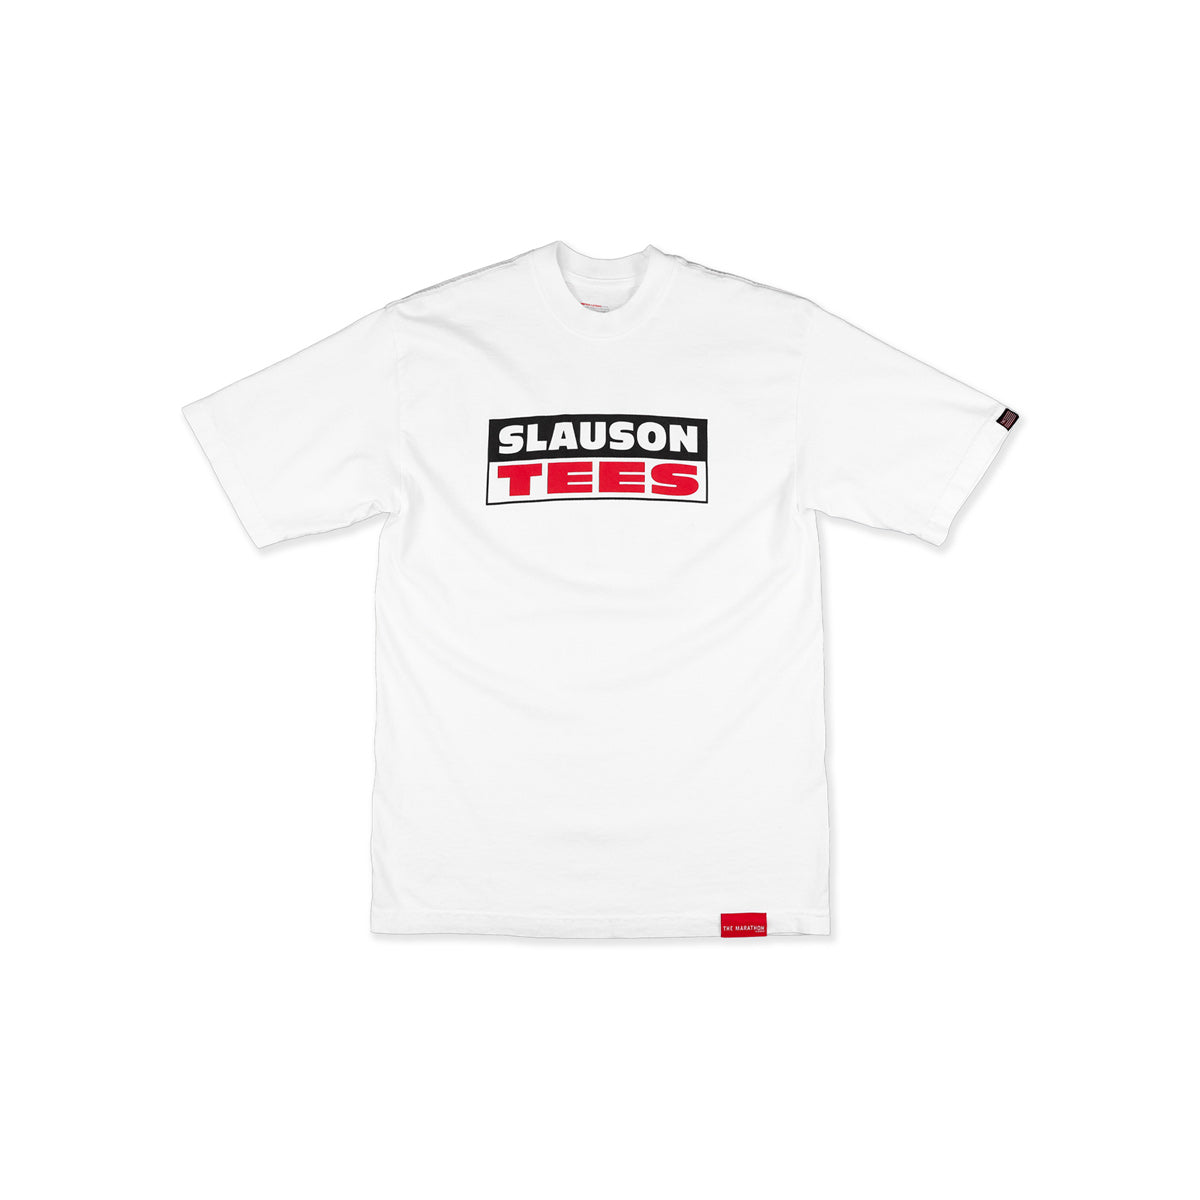 Limited Edition Slauson Tee’s T-Shirt - White - Front